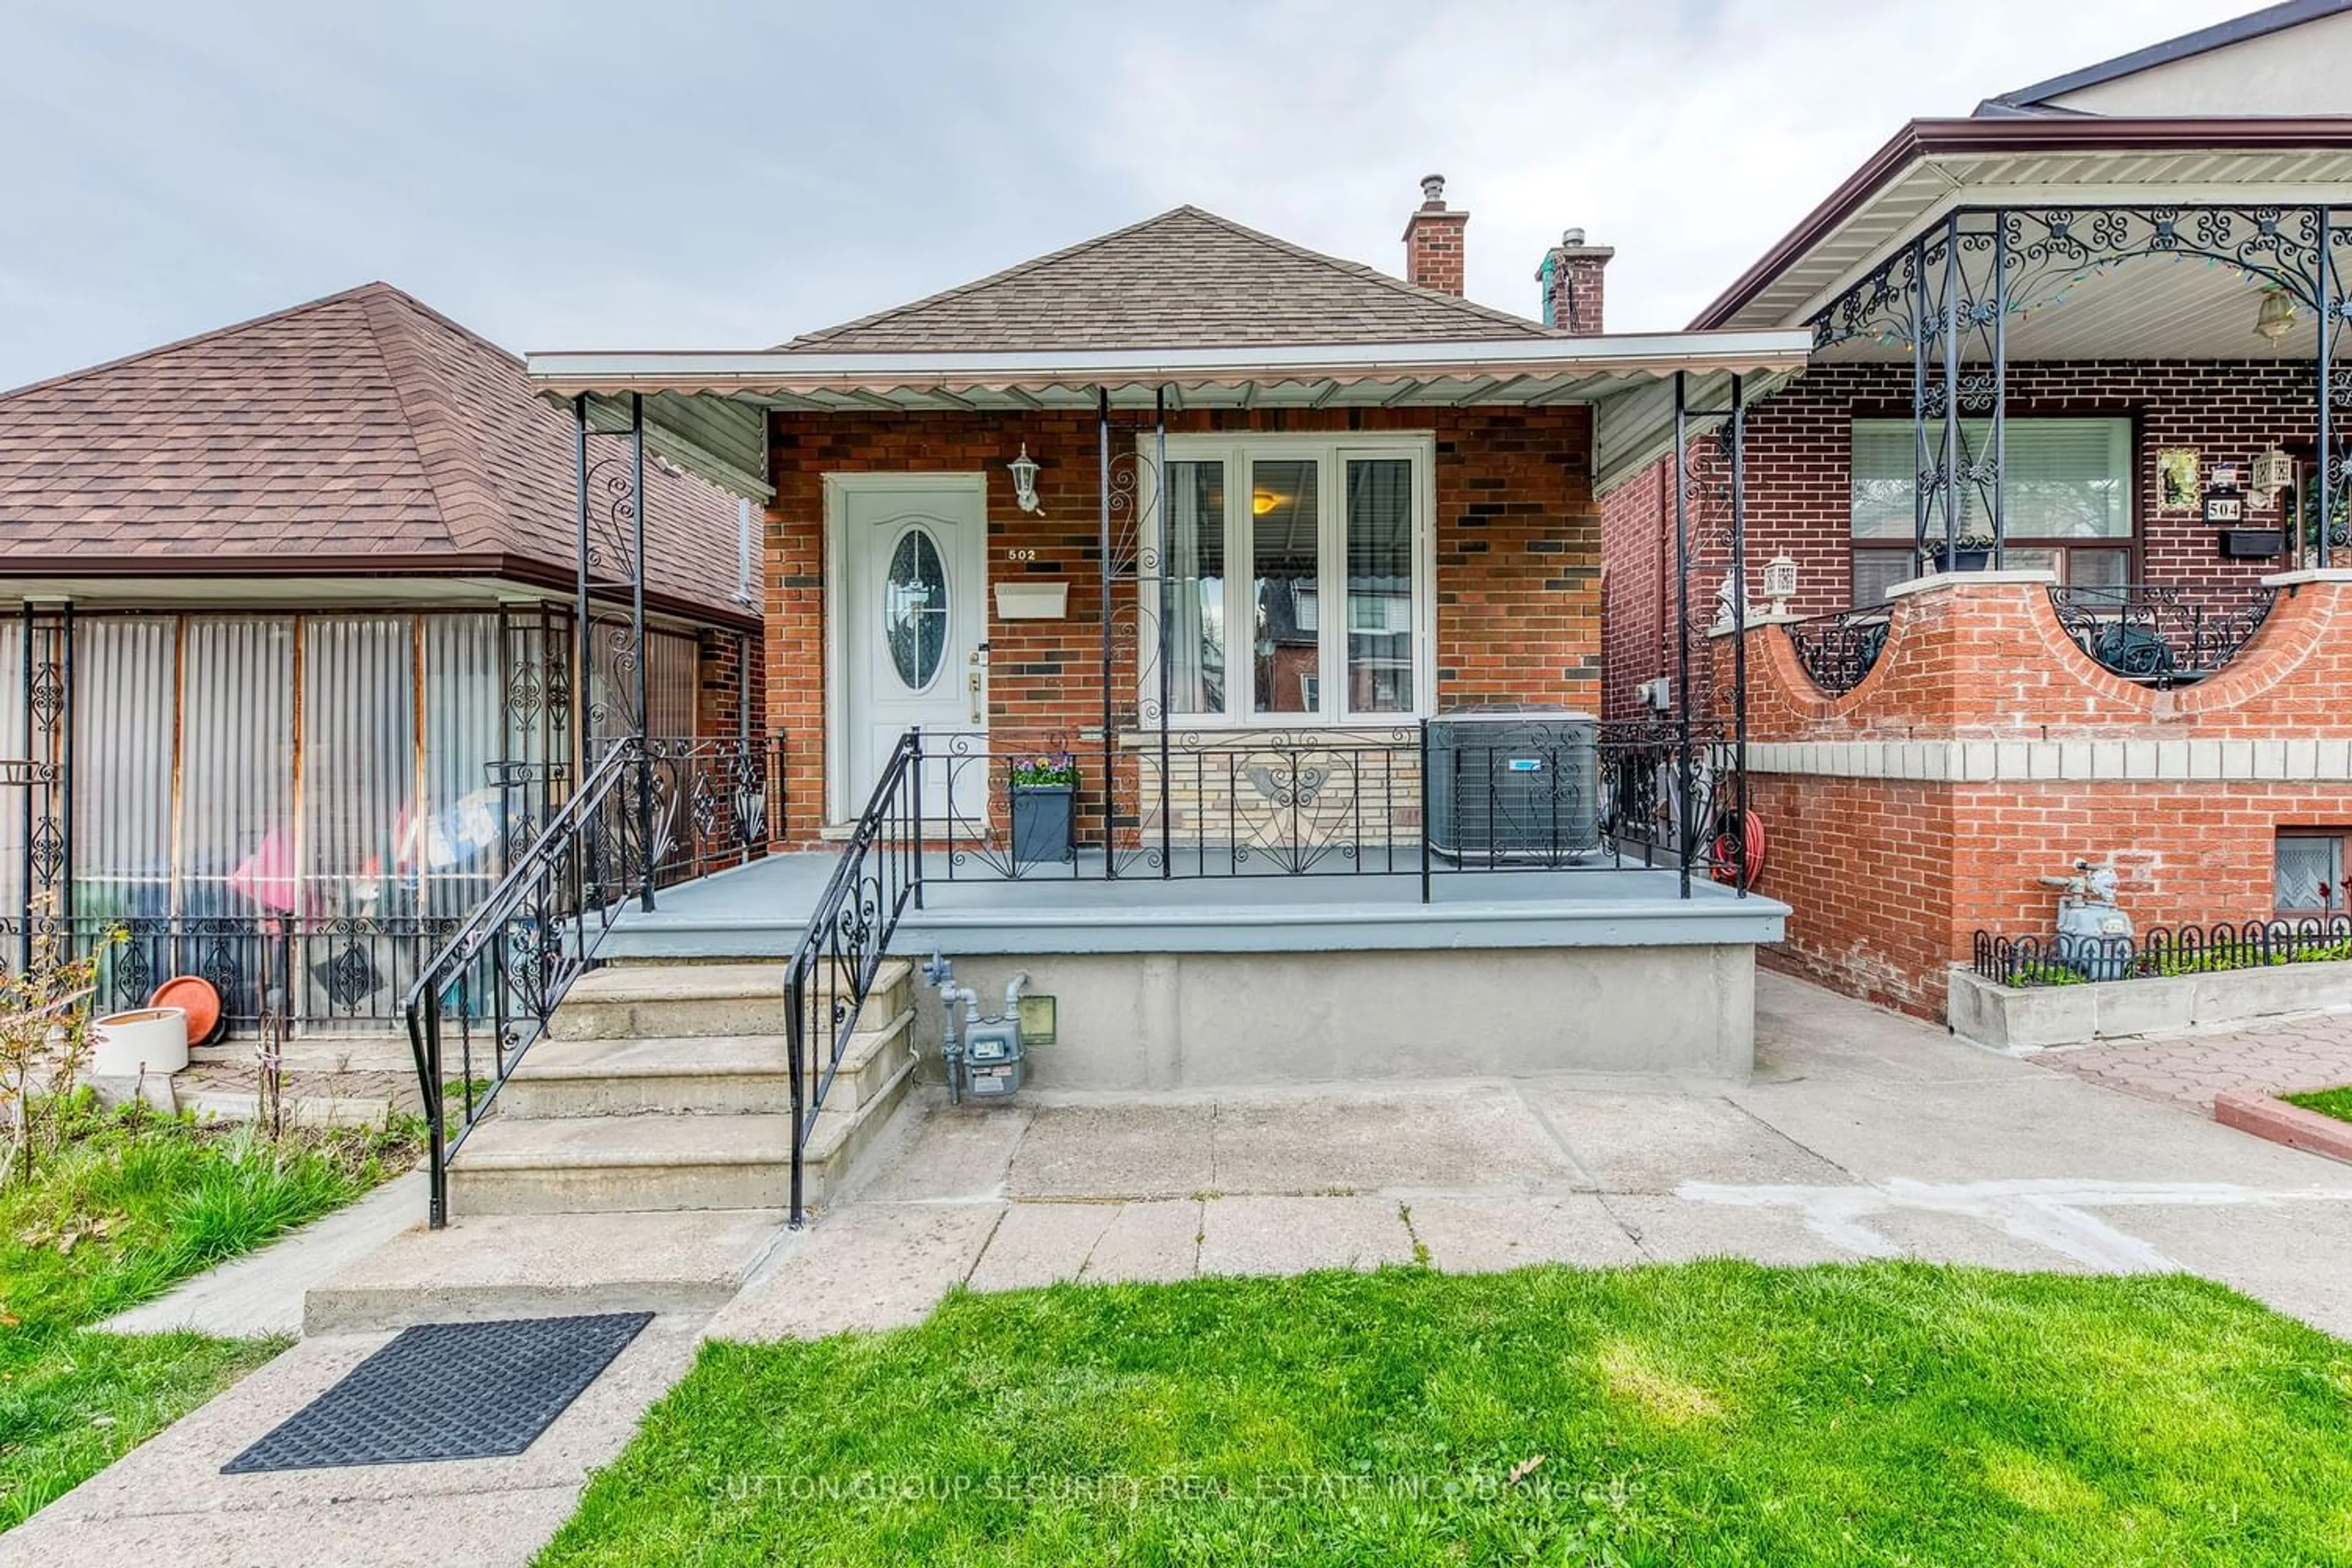 Home with brick exterior material for 502 Westmount Ave, Toronto Ontario M6E 3N5